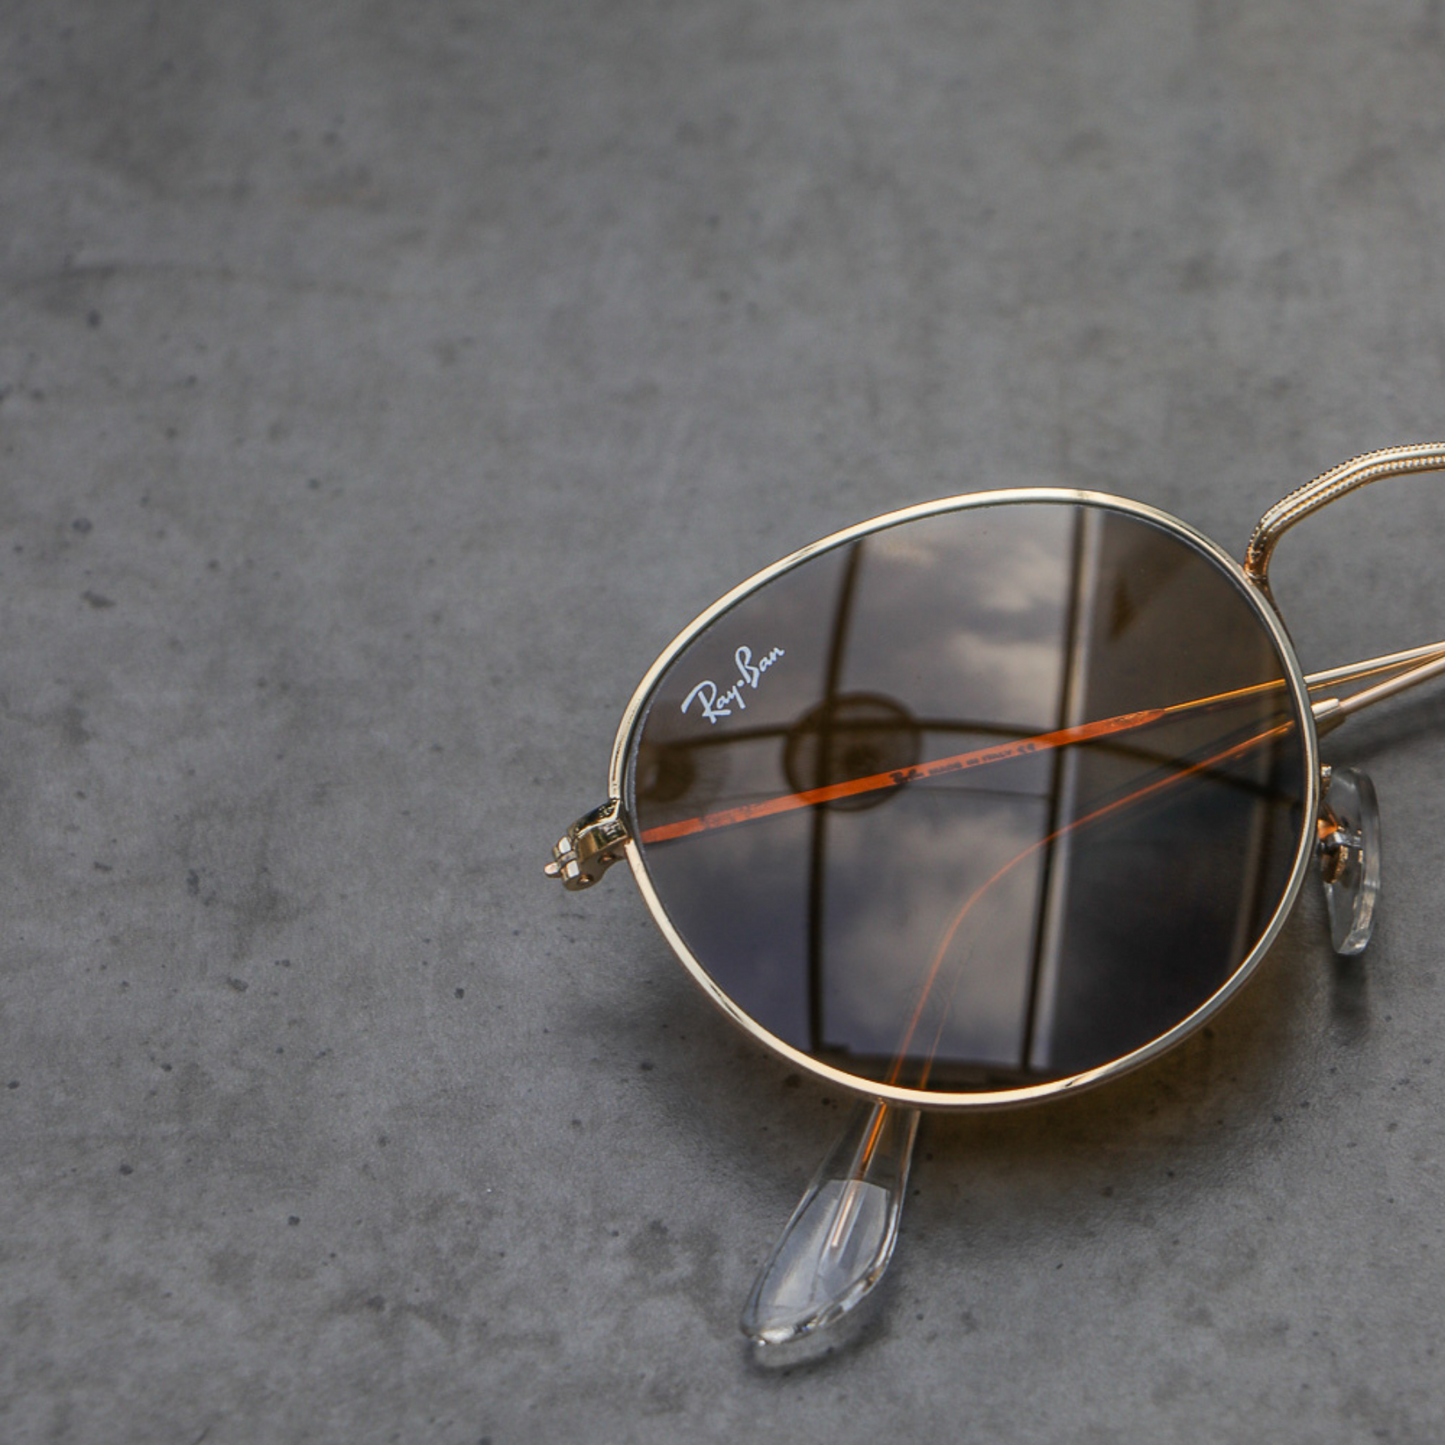 New Stylish Attractive Brown & Gold 3447 Round Sunglass For Unisex